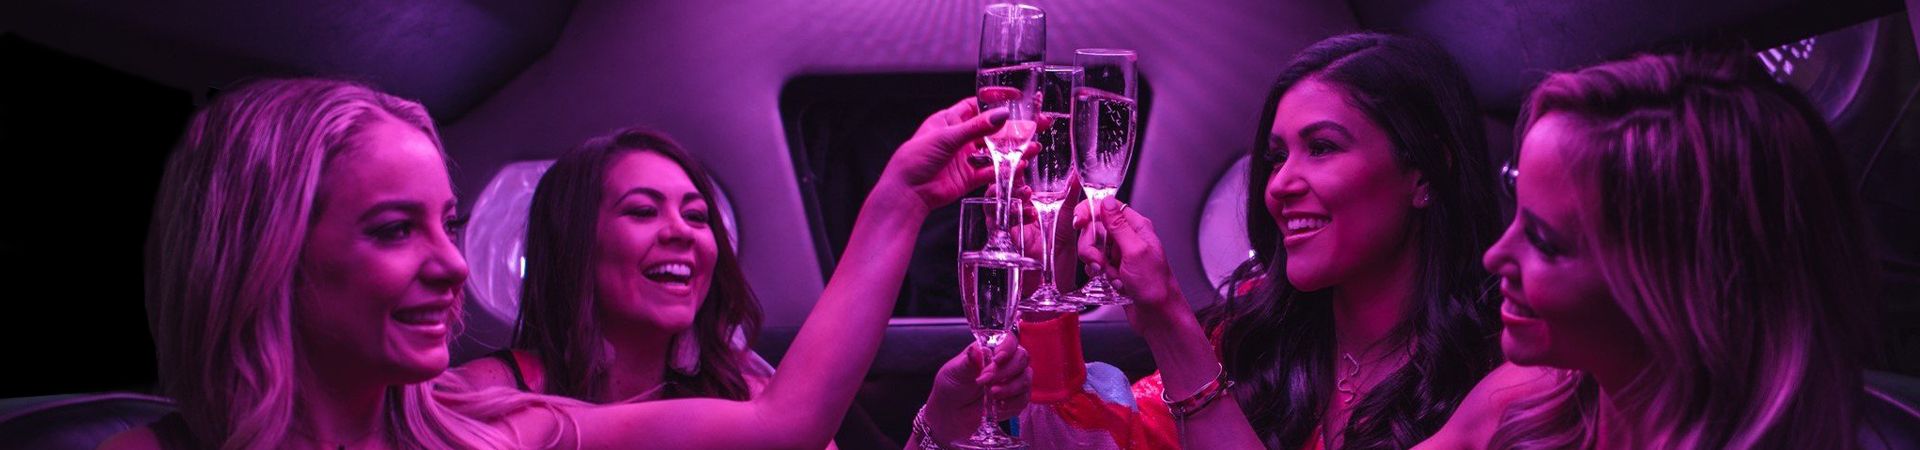 Nights Out with Friends - Long Island Limousine Services